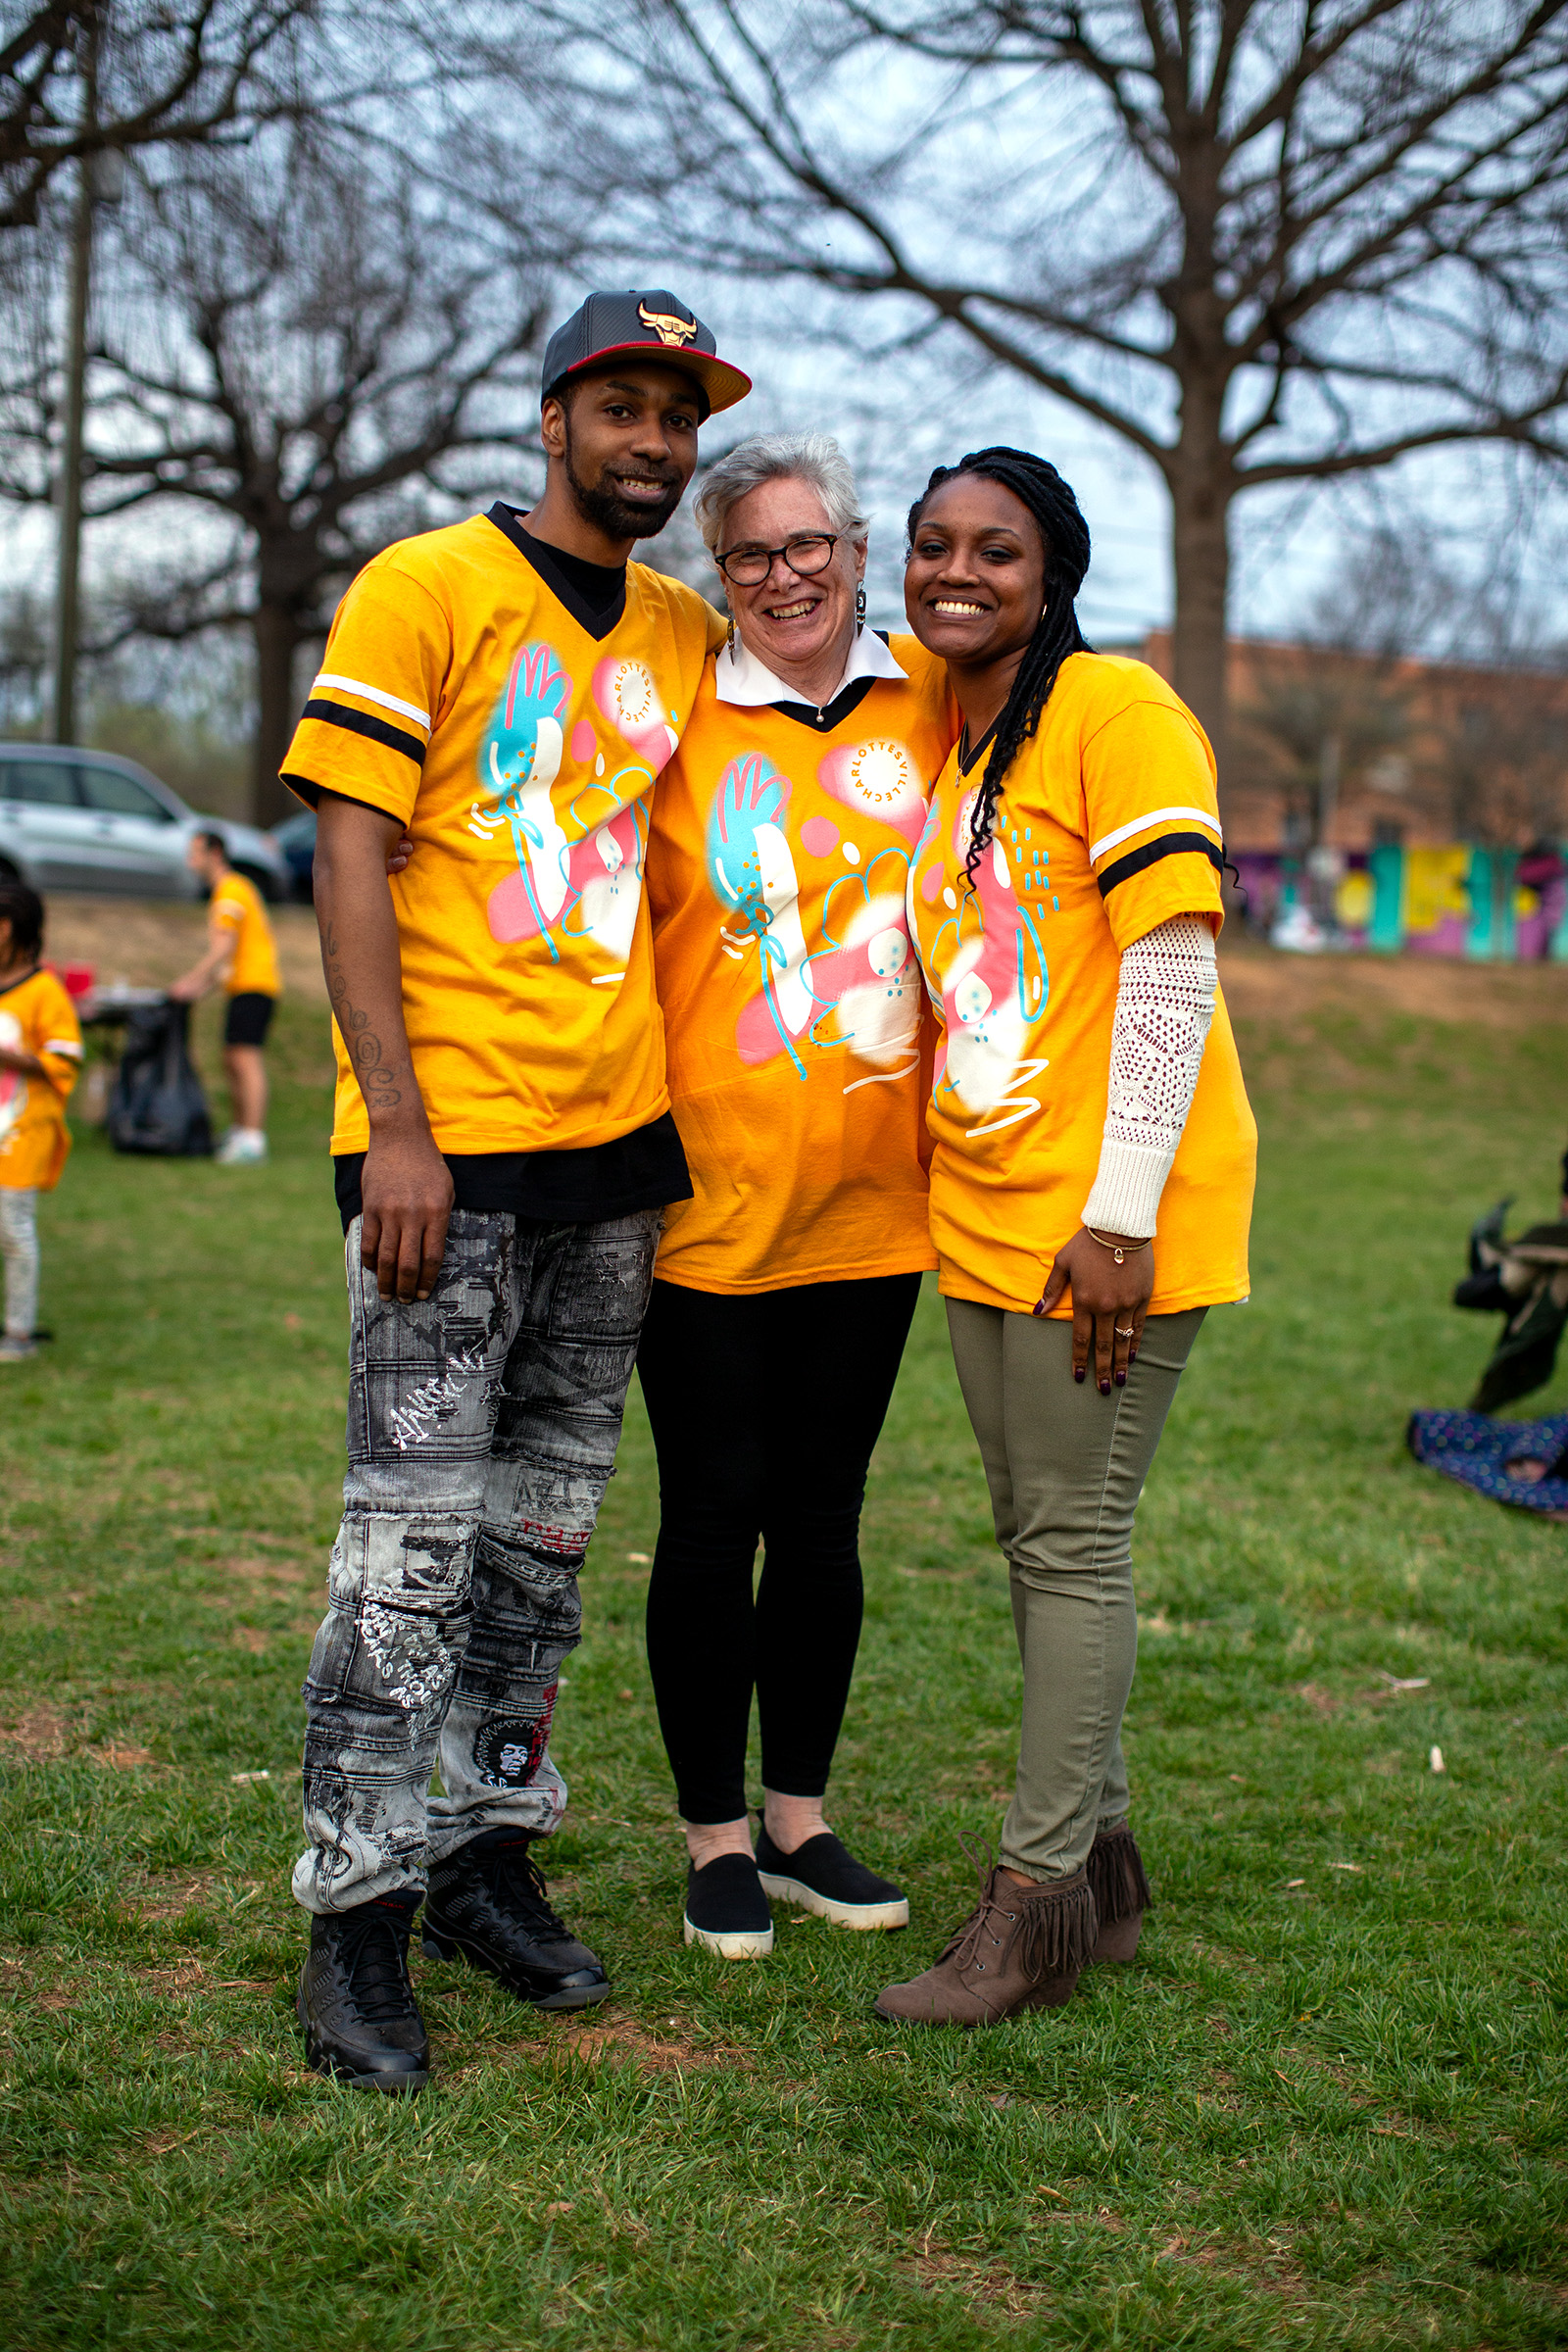 A photograph of three adults standing in a field wearing matching yellow jerseys that have an abstract floral graphic printed on them. The people have their arms around each other as they pose for the photo.